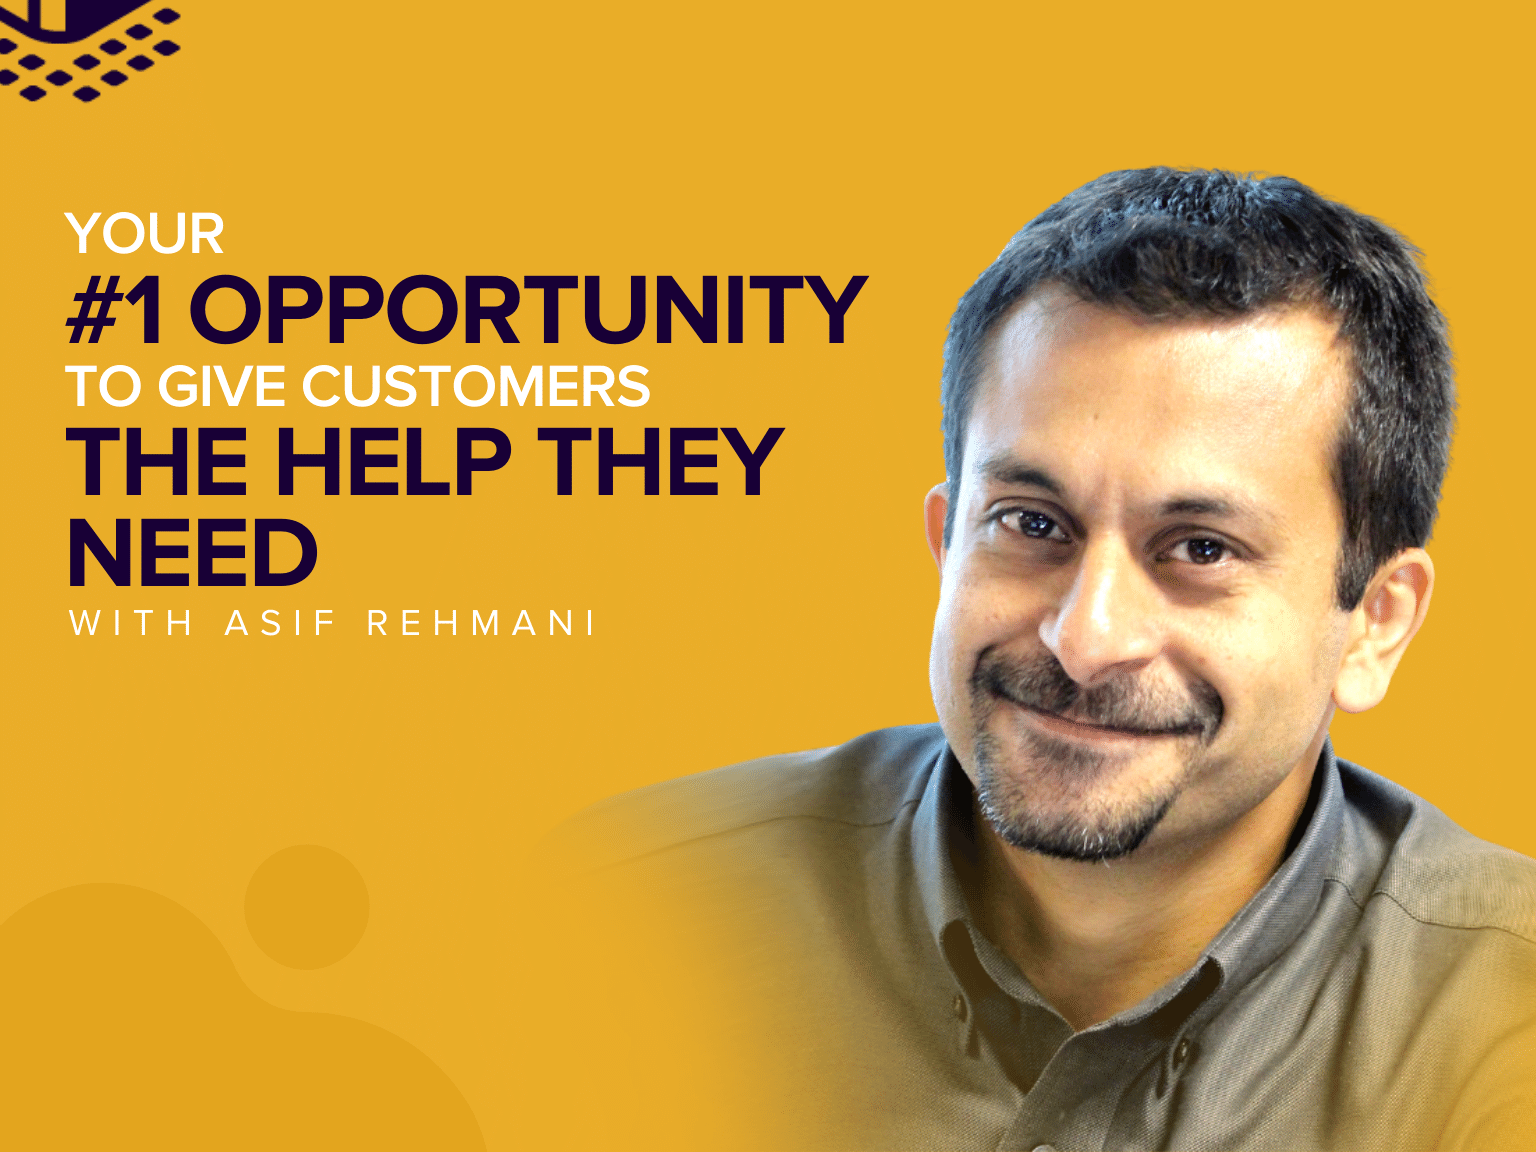 Your #1 Opportunity to Give Customers The Help They Need with Asif Rehmani